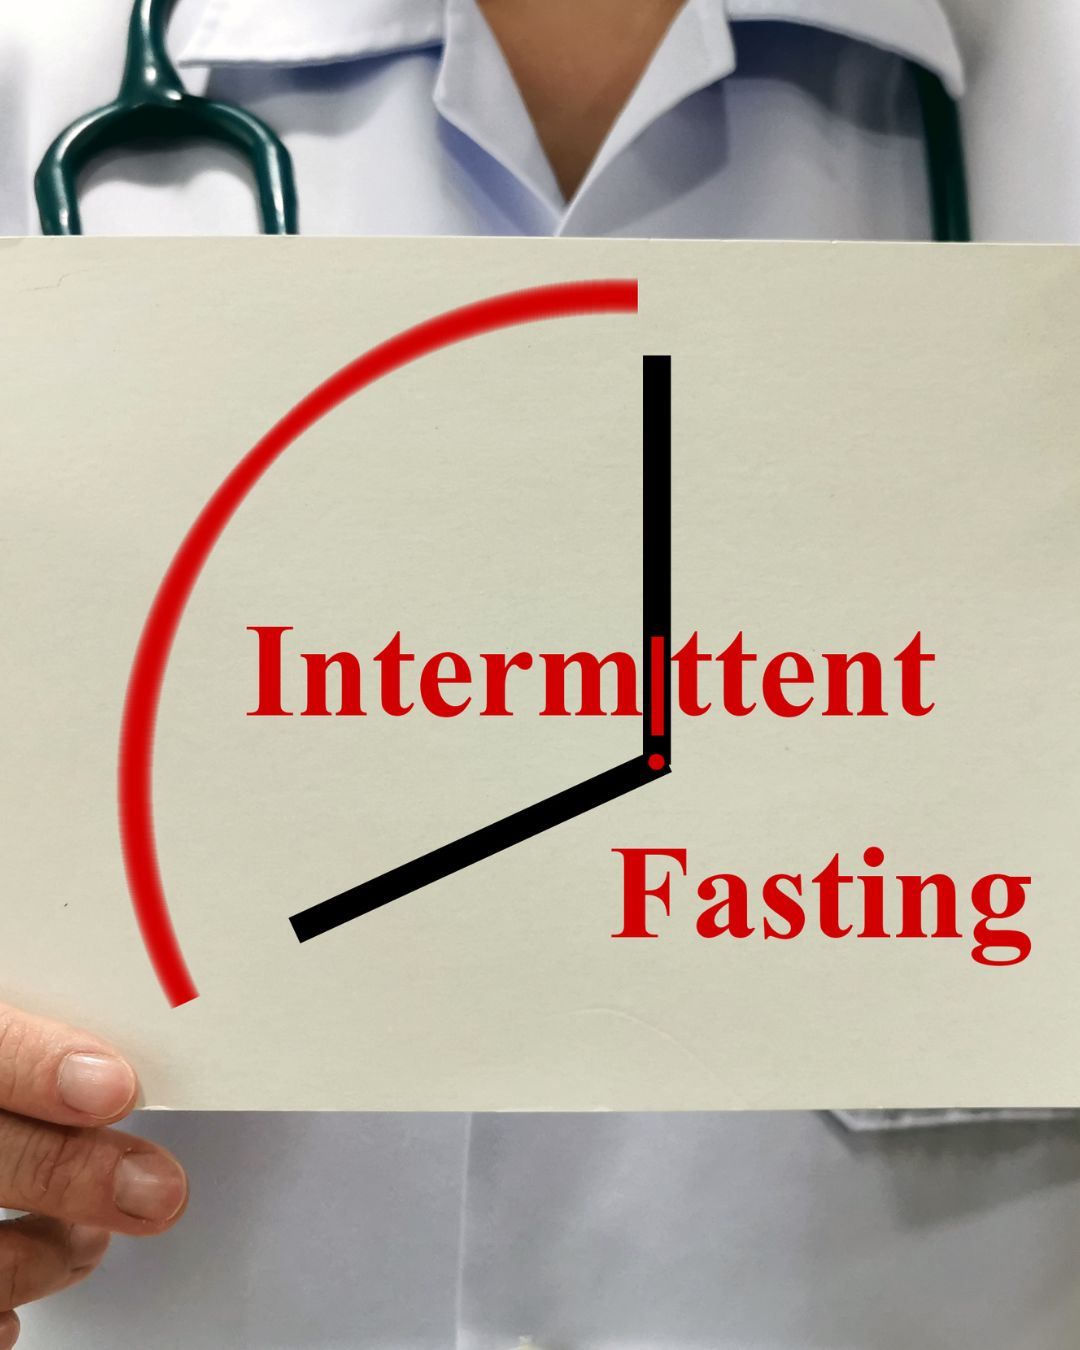 facts about intermittent fasting